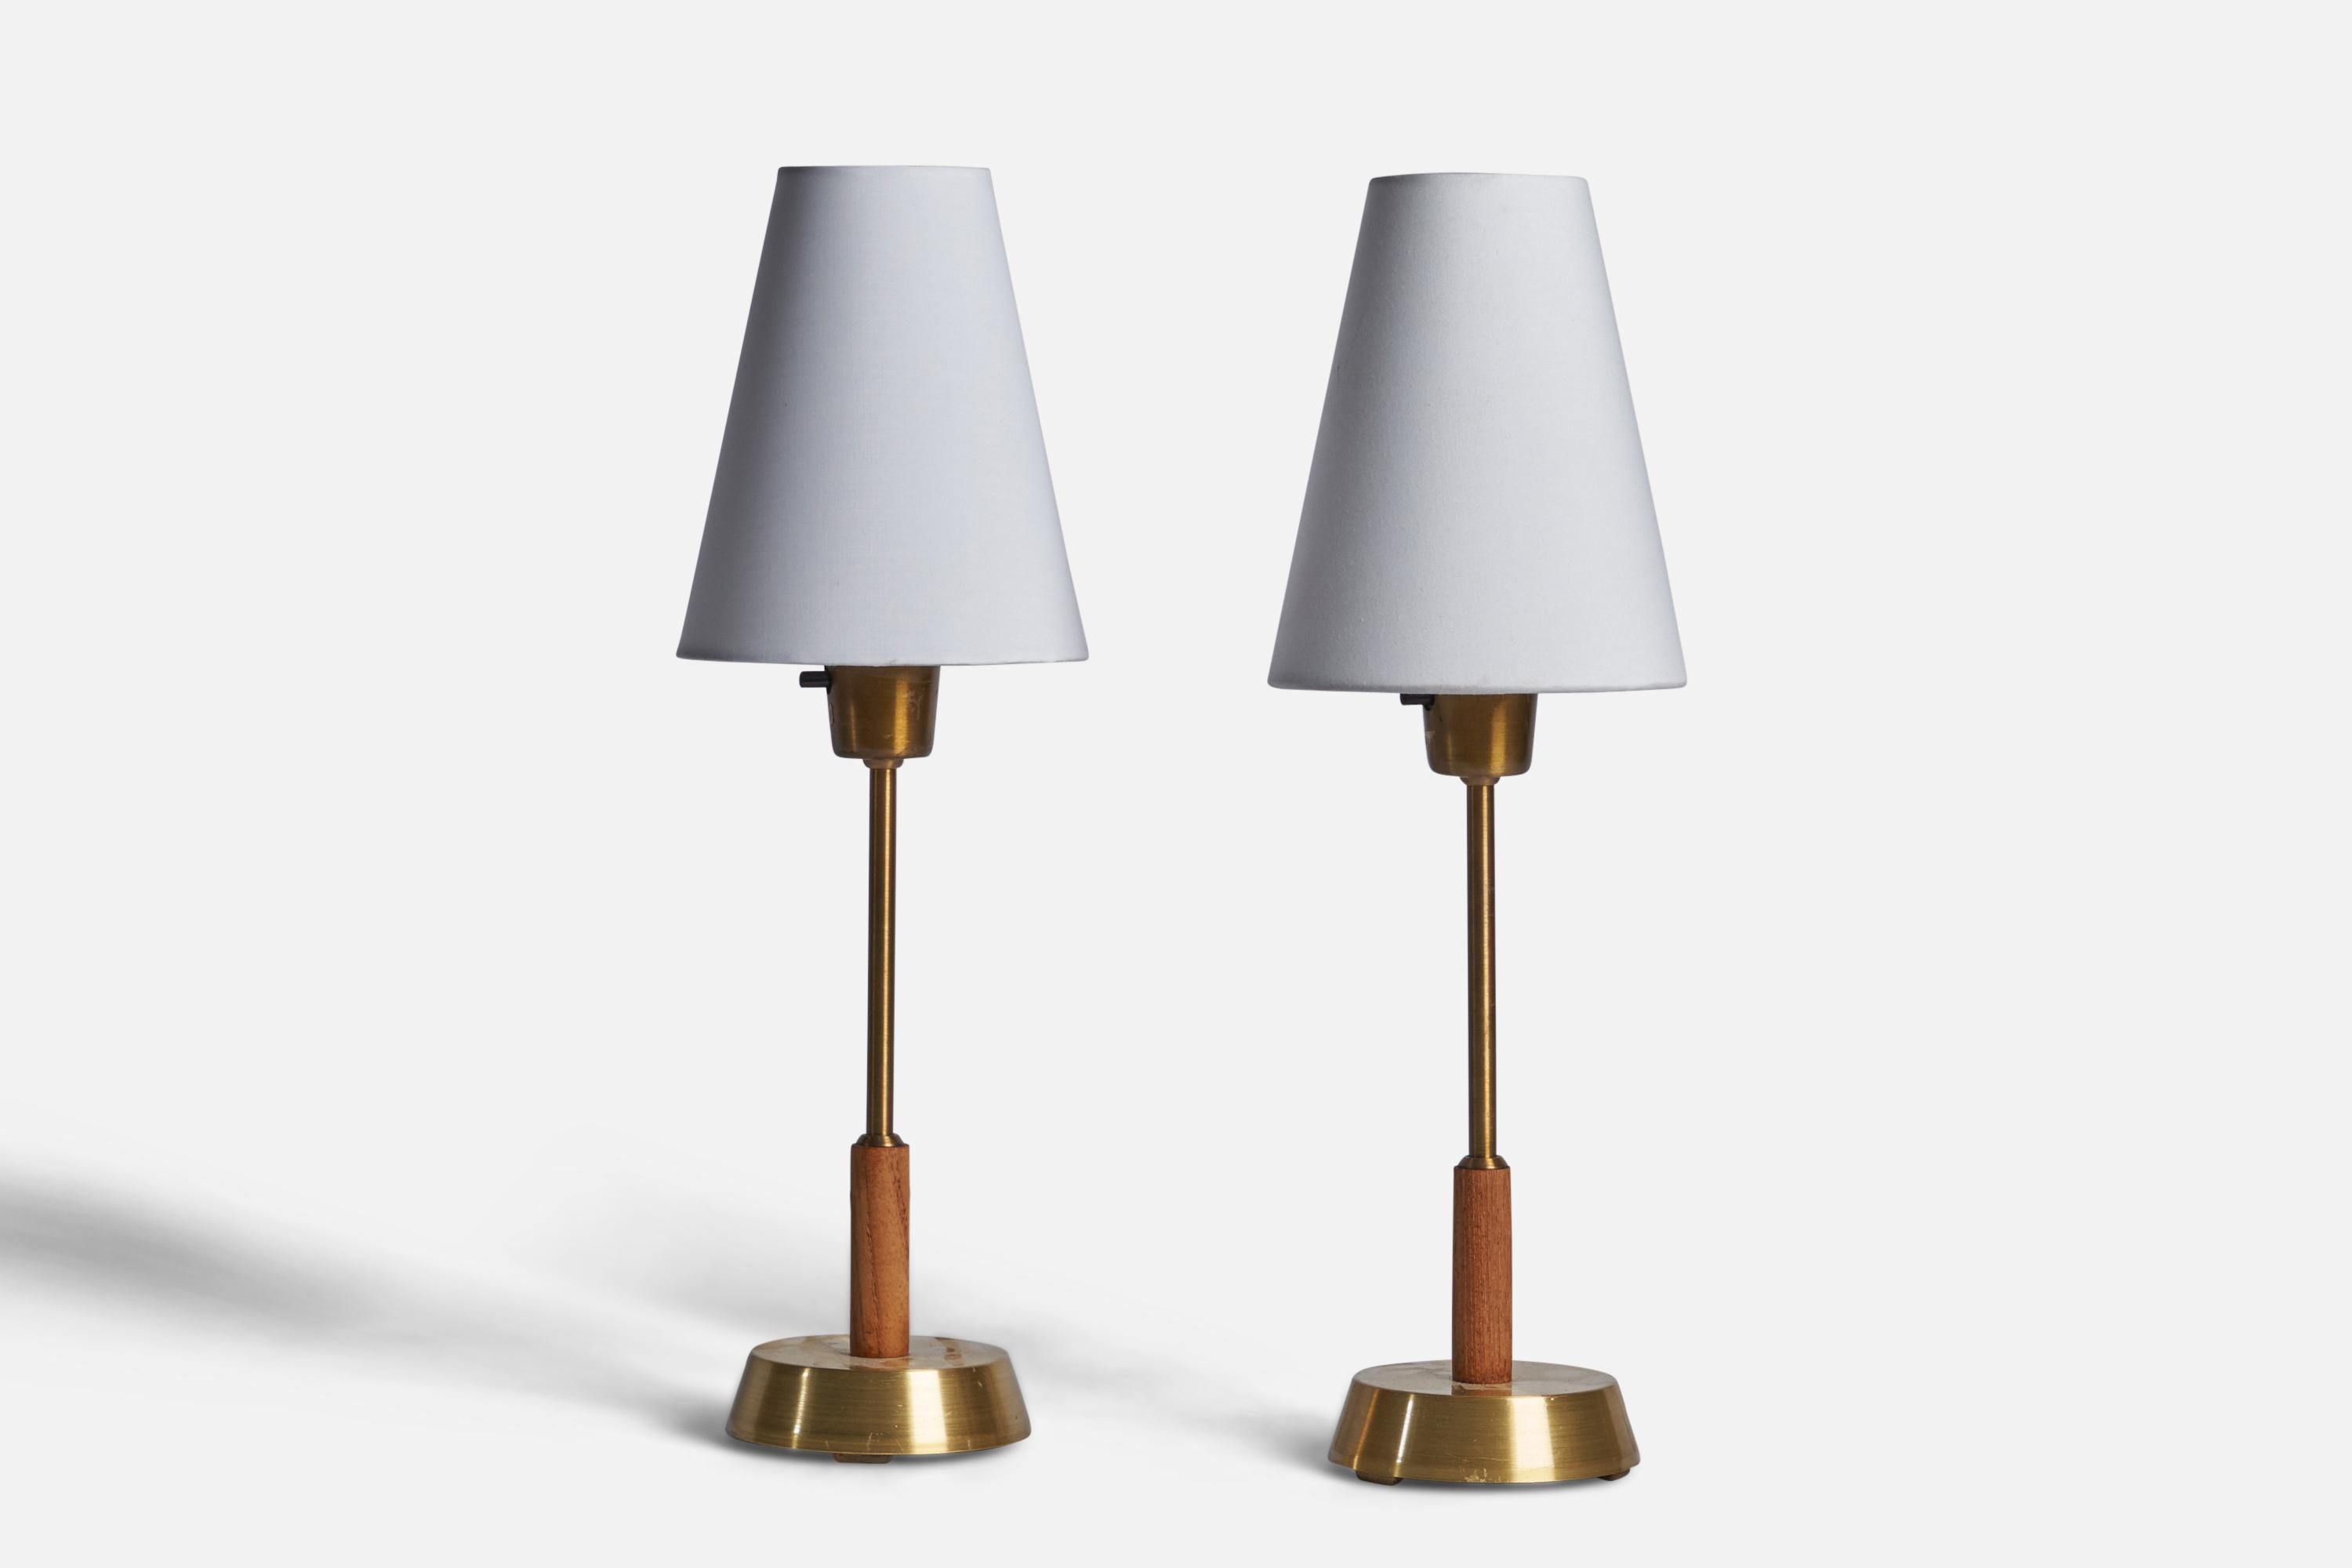 A pair of brass, teak and white fabric table lamps designed and produced in Sweden, 1950s.

Dimensions of Lamp (inches): 12